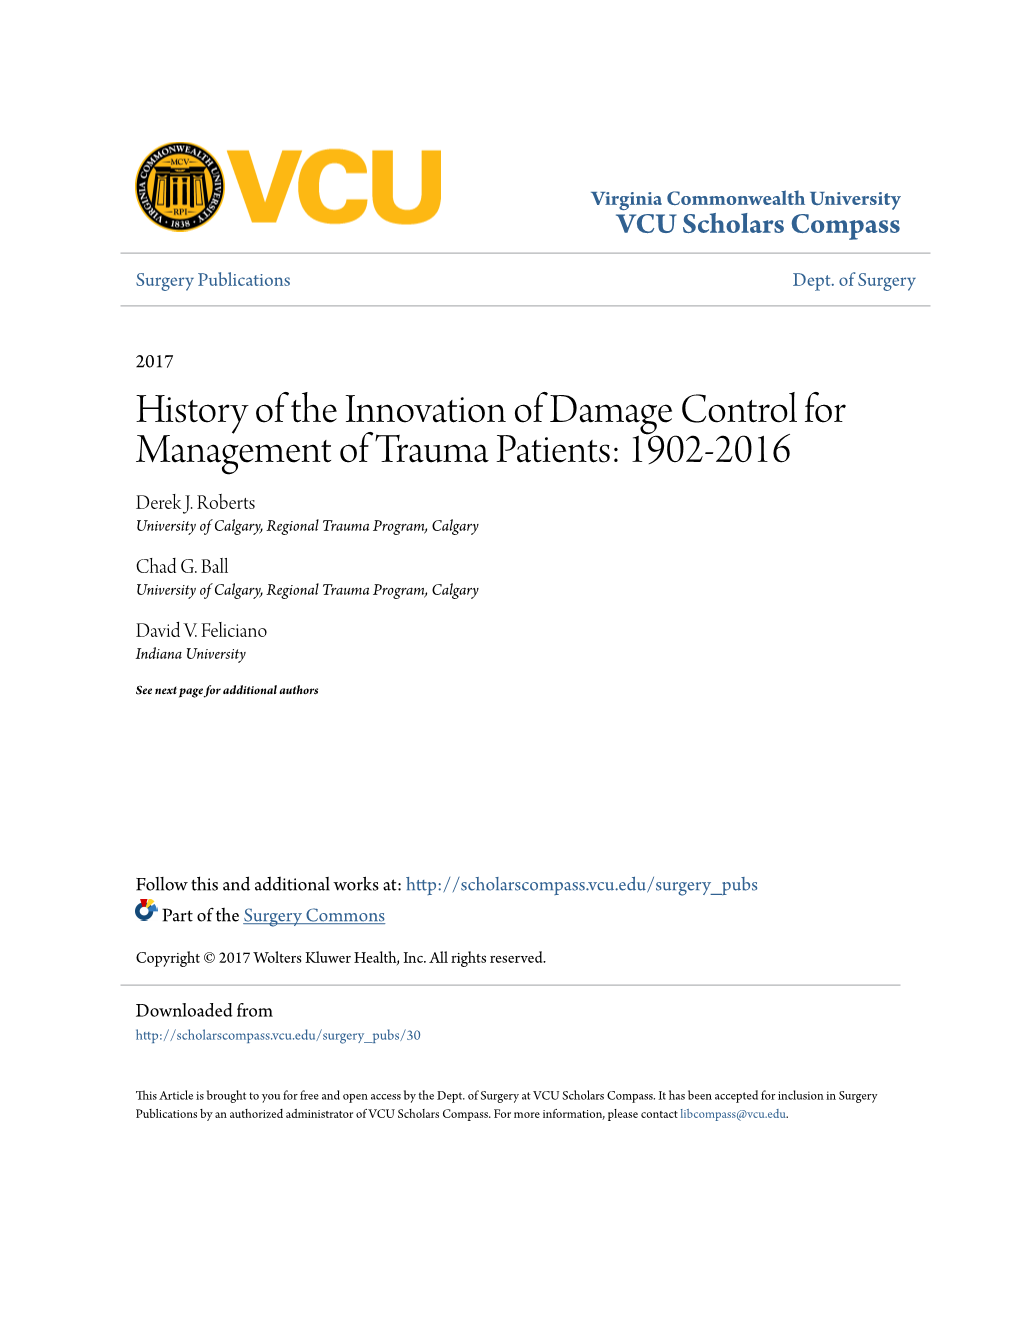 History of the Innovation of Damage Control for Management of Trauma Patients: 1902-2016 Derek J